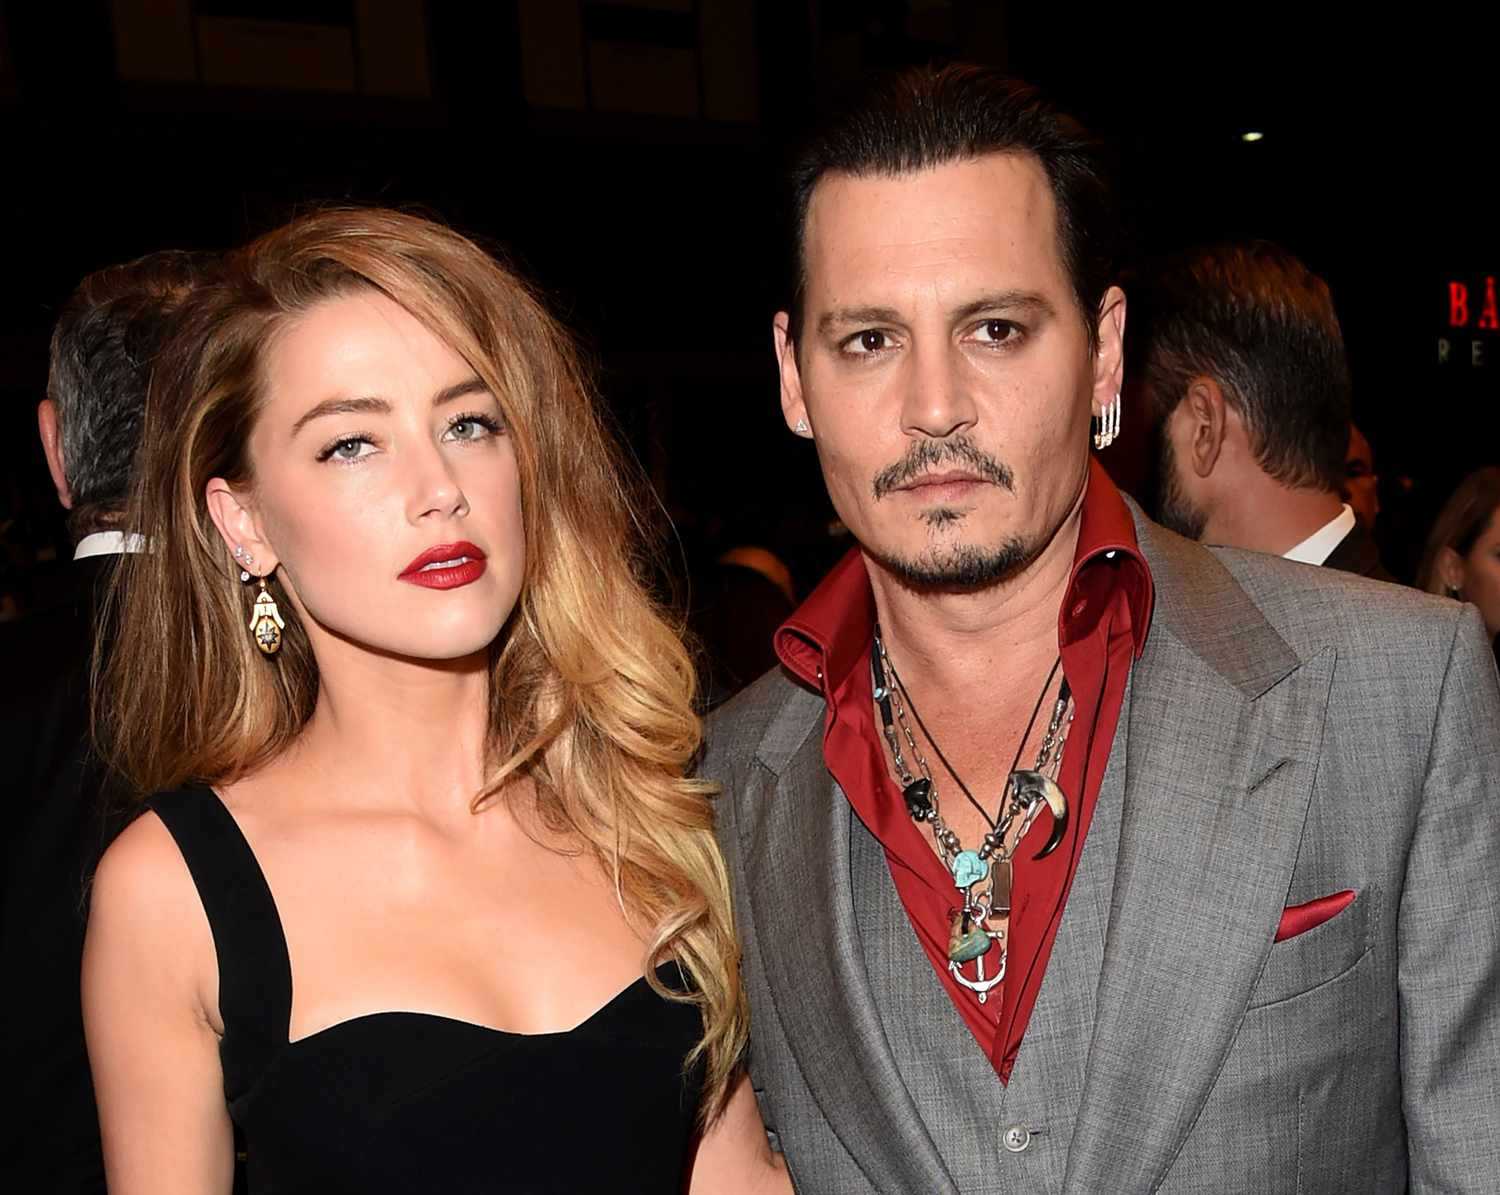 Amber Heard & Johnny Depp: A tumultuous love affair revisited